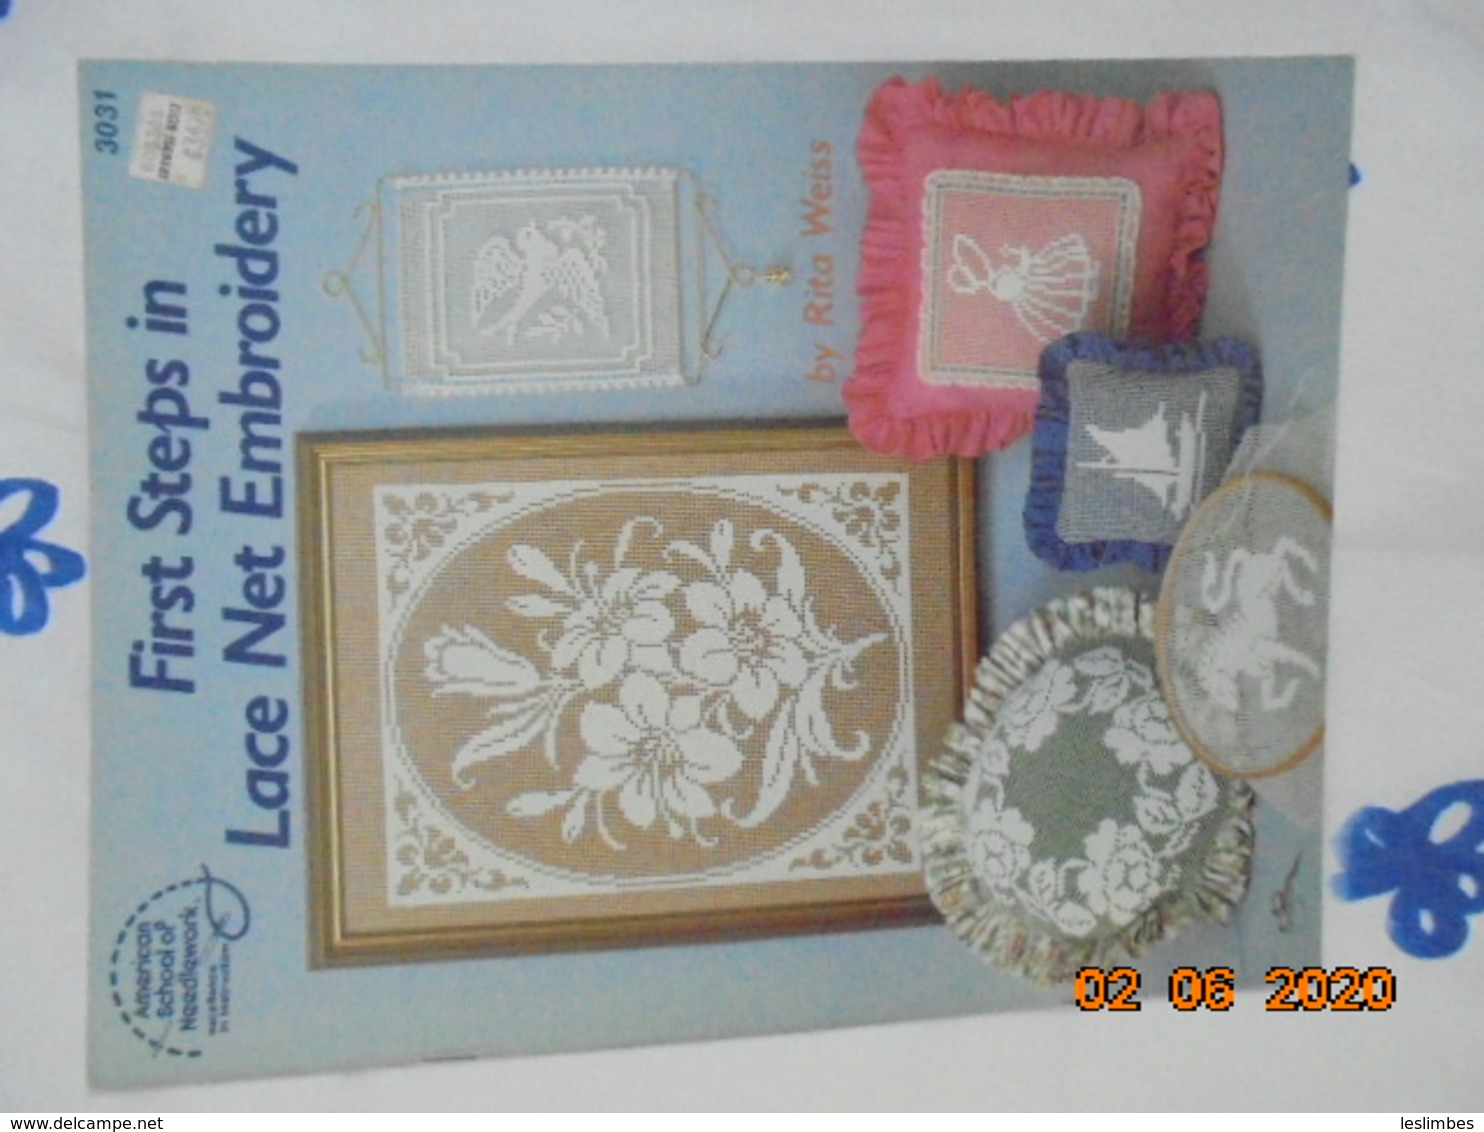 First Steps In Lace Net Embroidery By Rita Weiss ISBN 0881950815 American School Of Needlework 1984 - Ocios Creativos